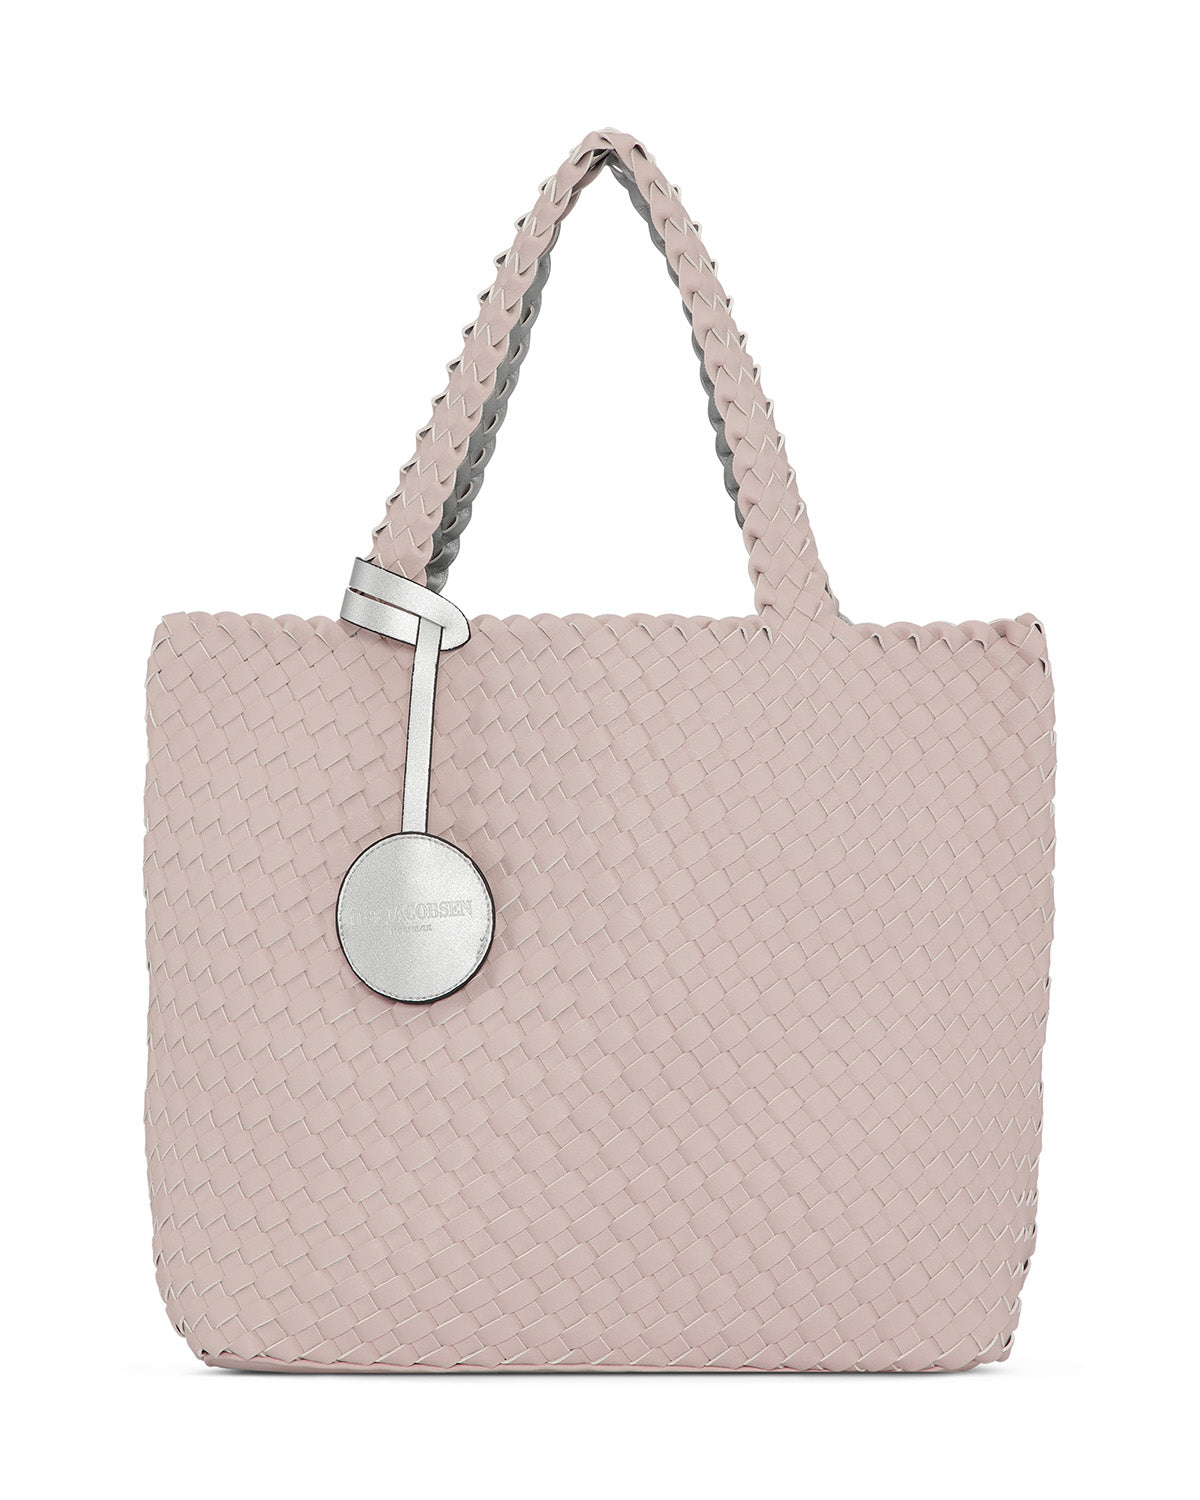 Tote bag in color rose silver by Ilse Jacobsen